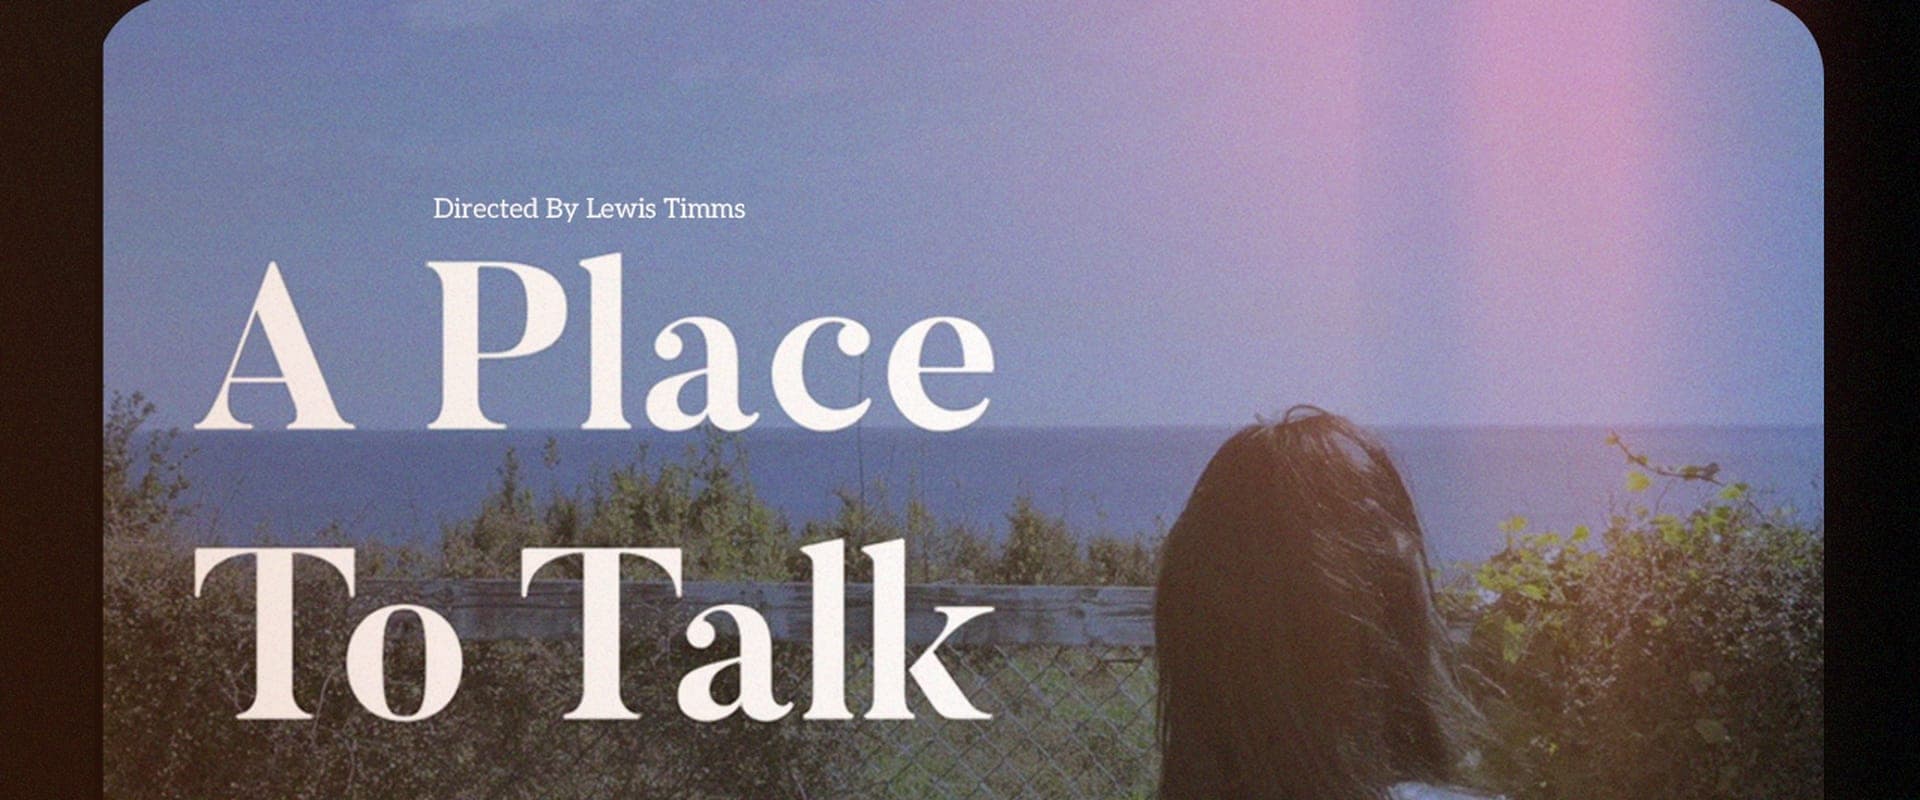 A Place To Talk